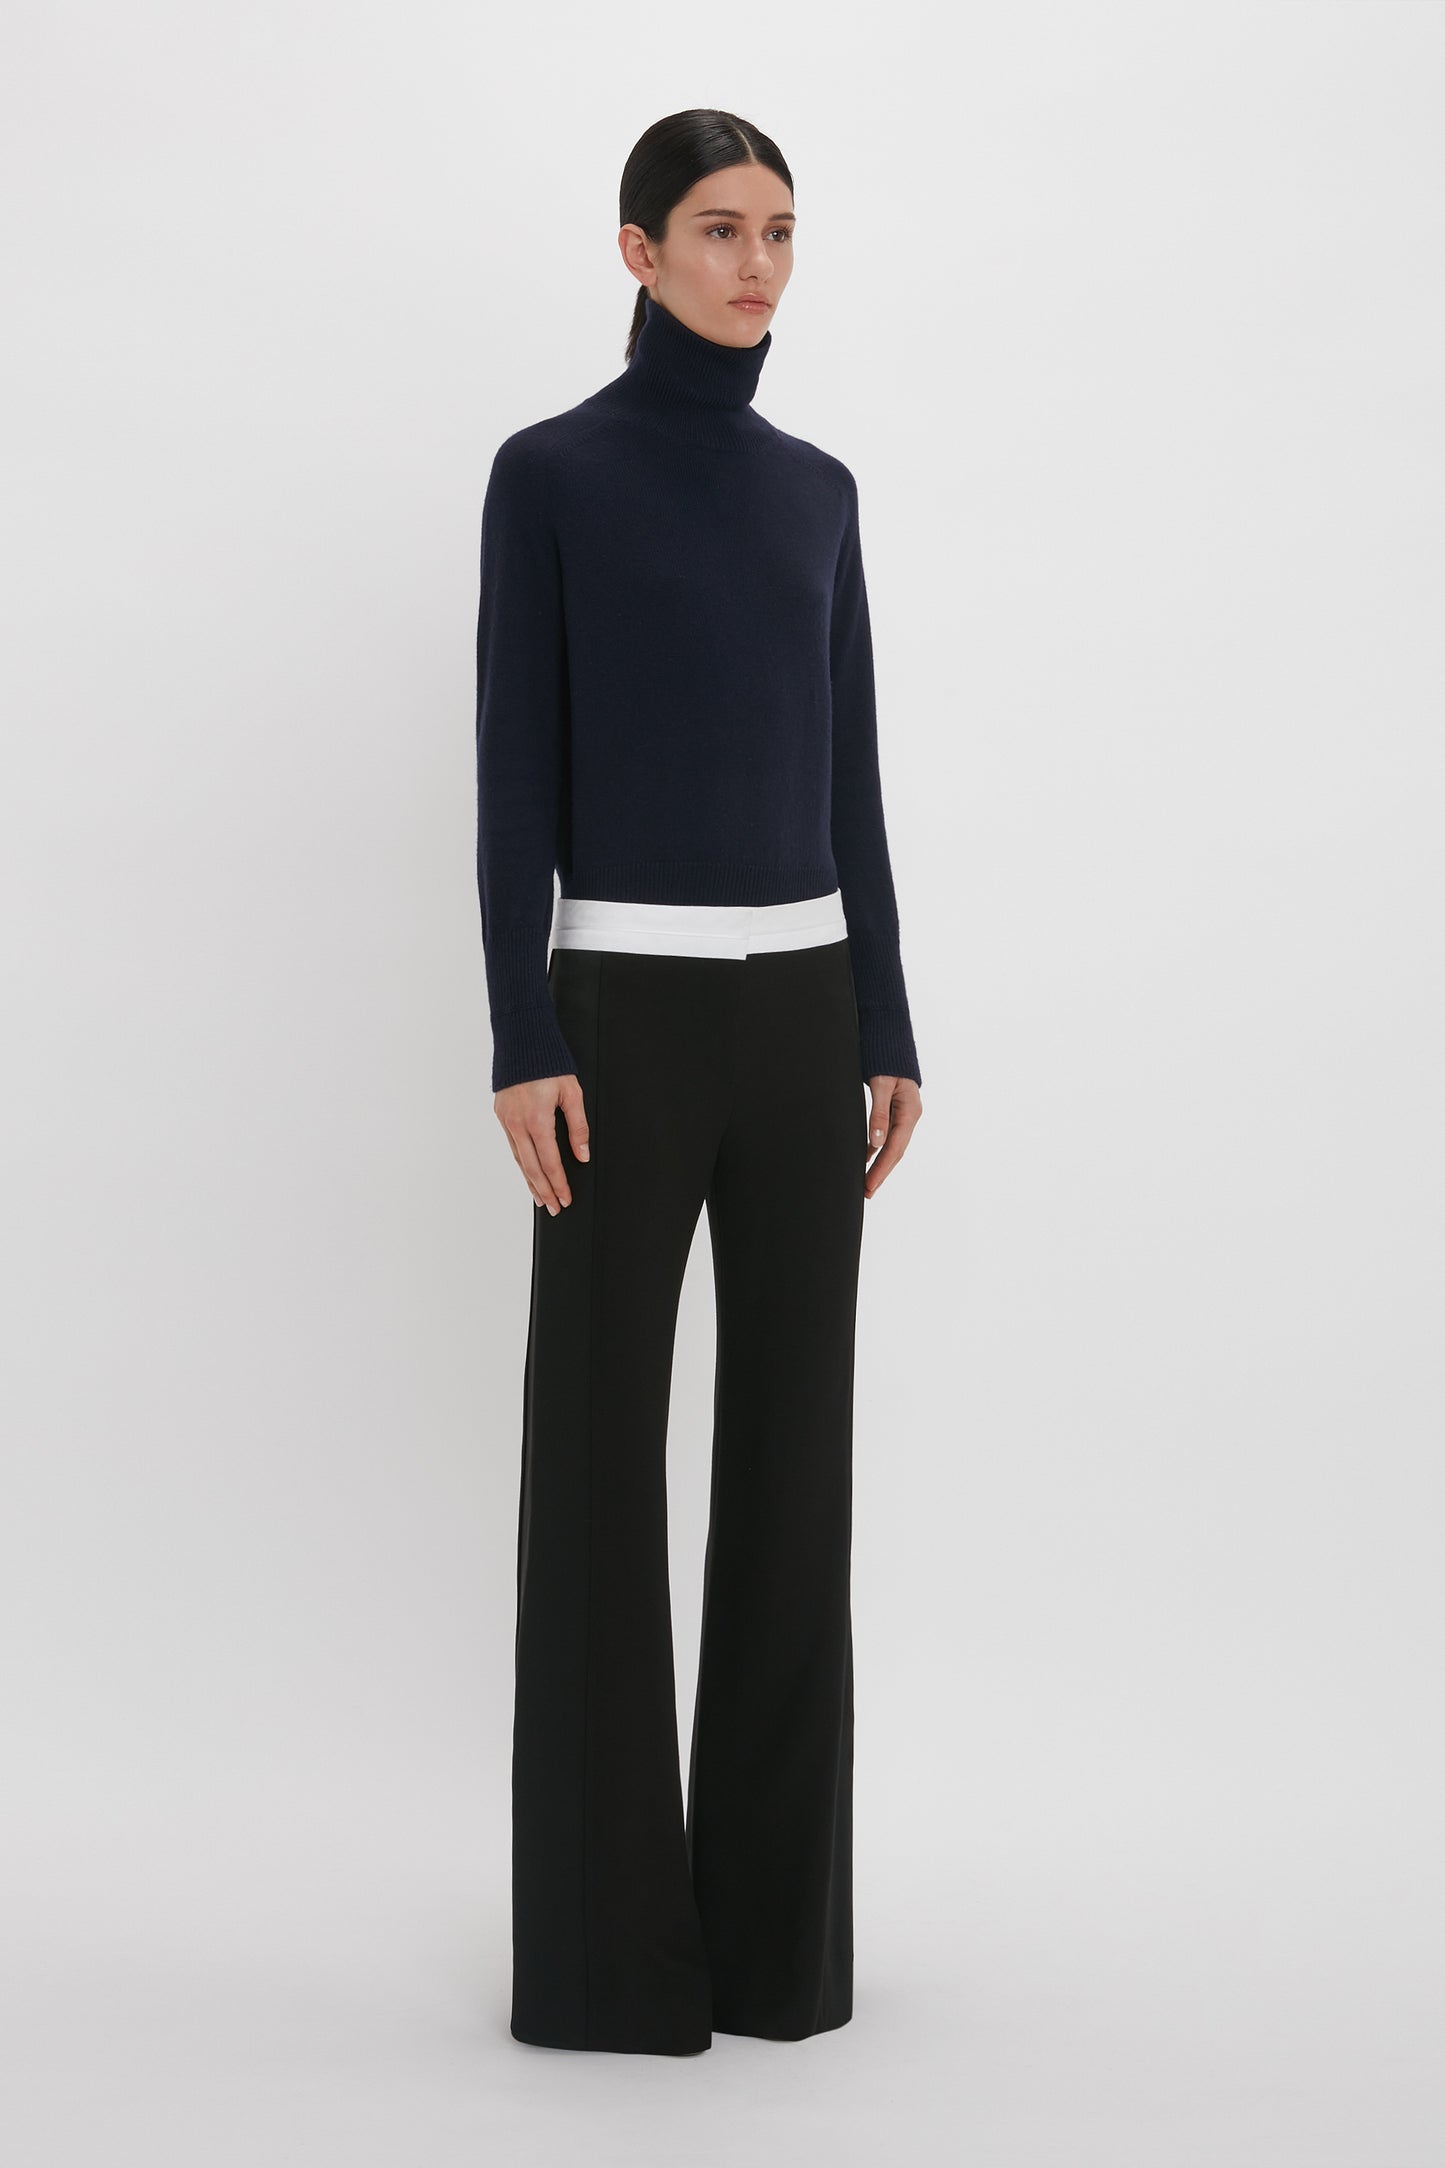 A person stands against a plain background, wearing a black turtleneck sweater and Victoria Beckham's Side Panel Trouser In Black with a white waistband.